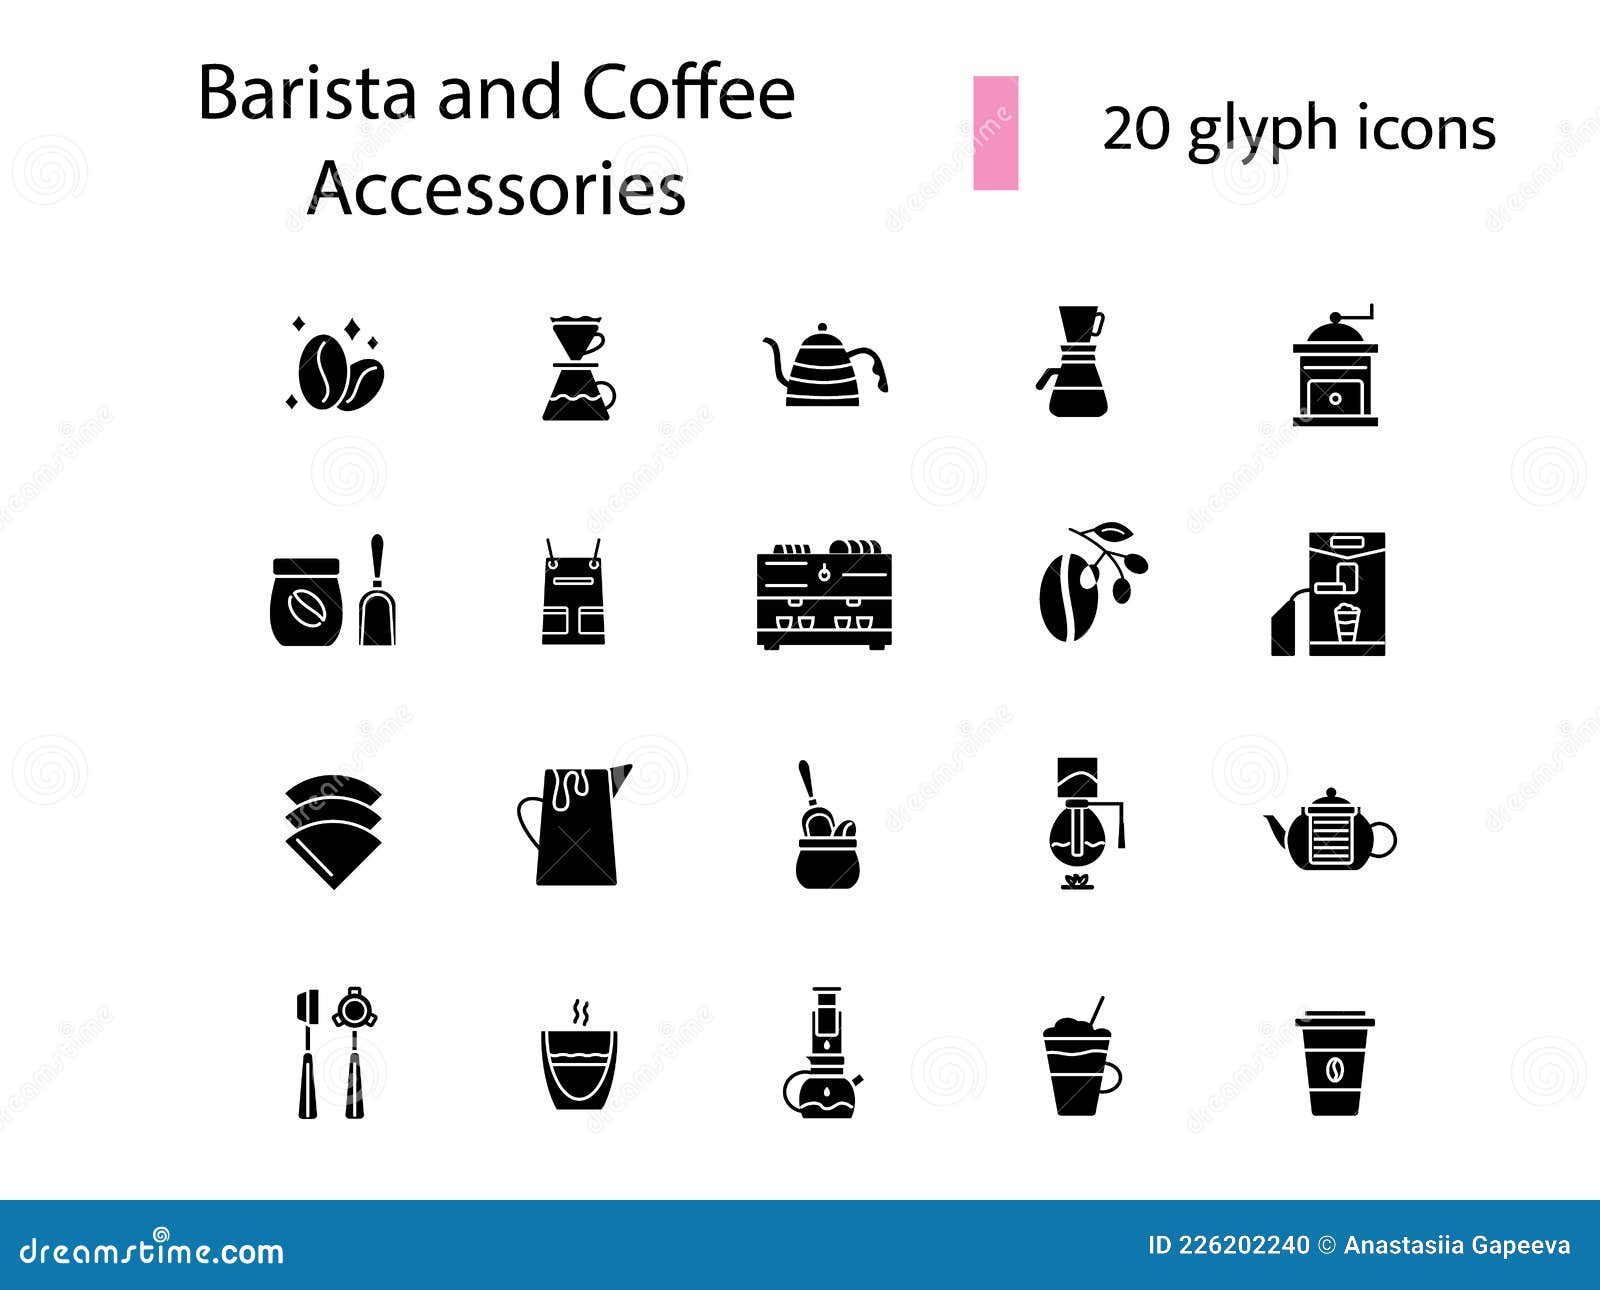 https://thumbs.dreamstime.com/z/barista-devices-glyph-icons-set-french-press-measuring-cup-isolated-vector-illustration-kettler-knock-box-air-pressure-machine-226202240.jpg